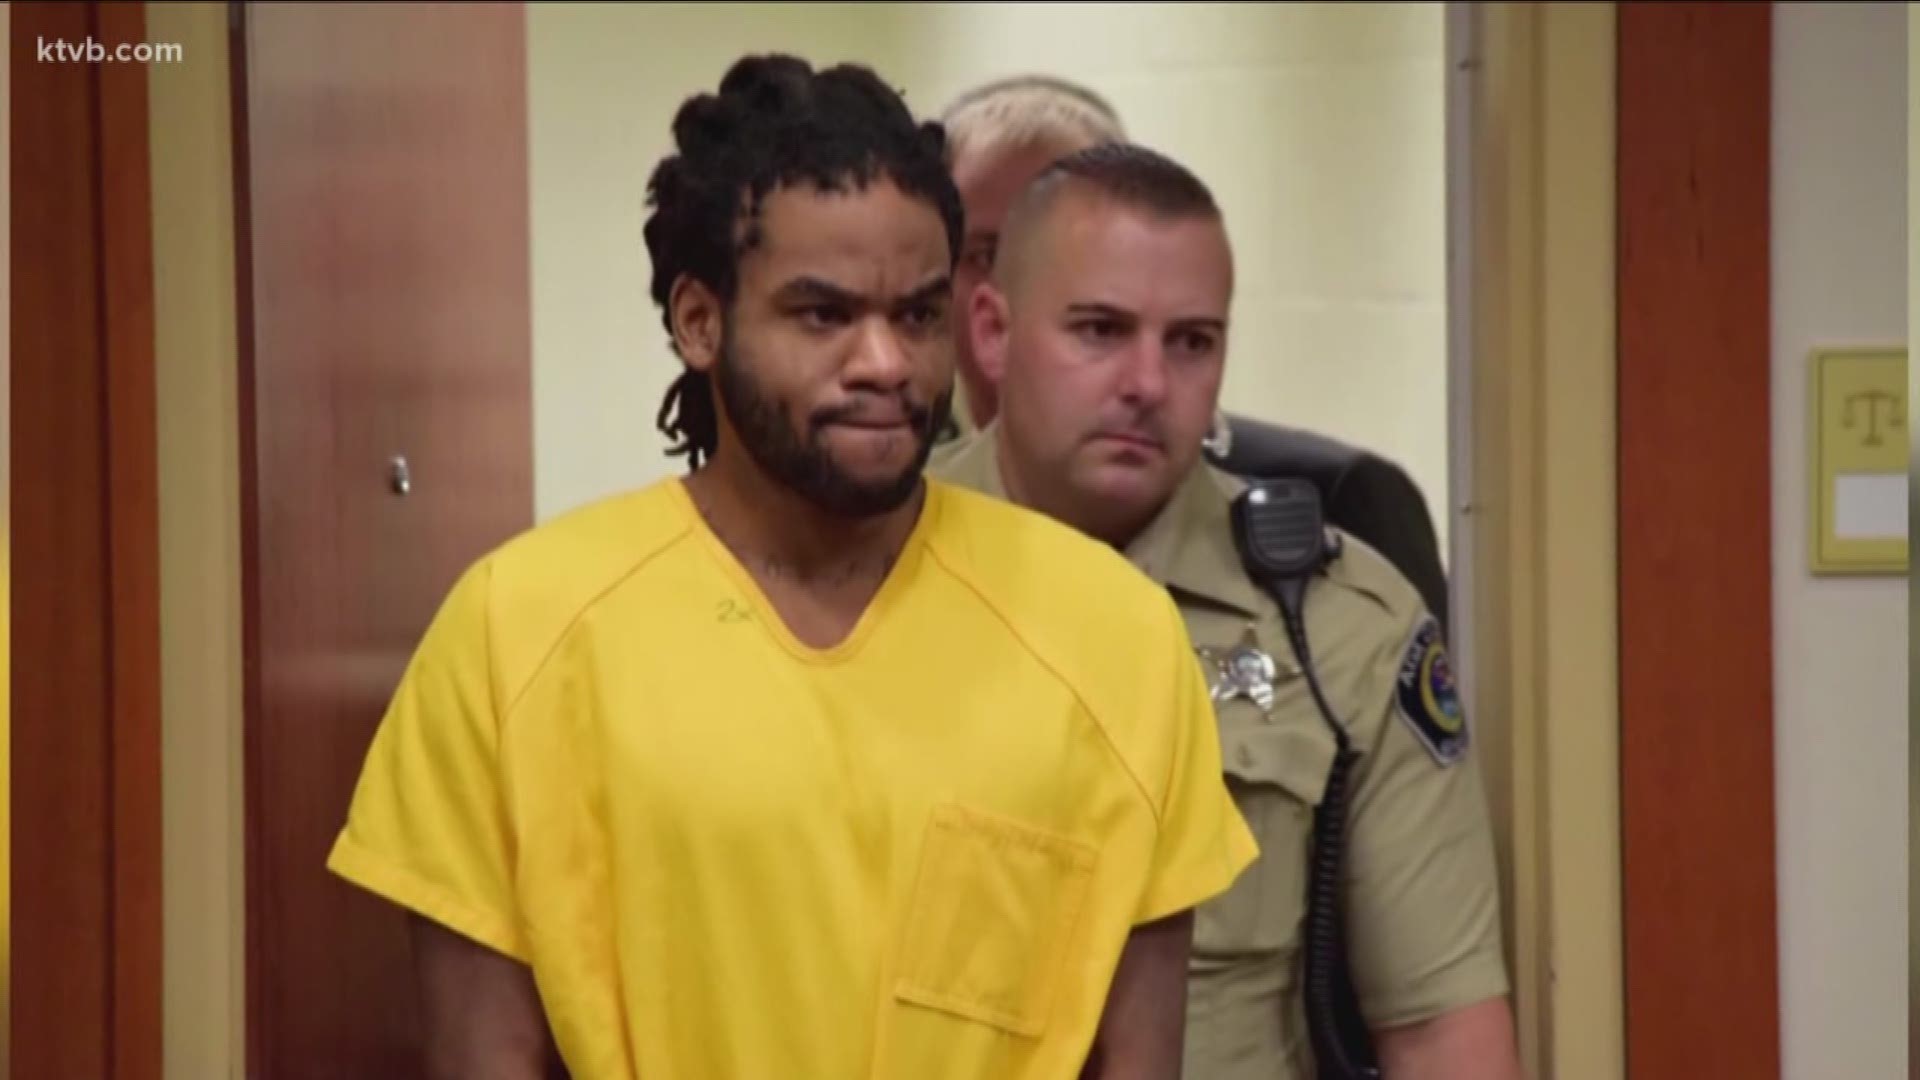 The man accused of killing a 3-year-old girl and wounding eight others during a stabbing rampage at a Boise apartment complex has been ruled fit to stand trial.